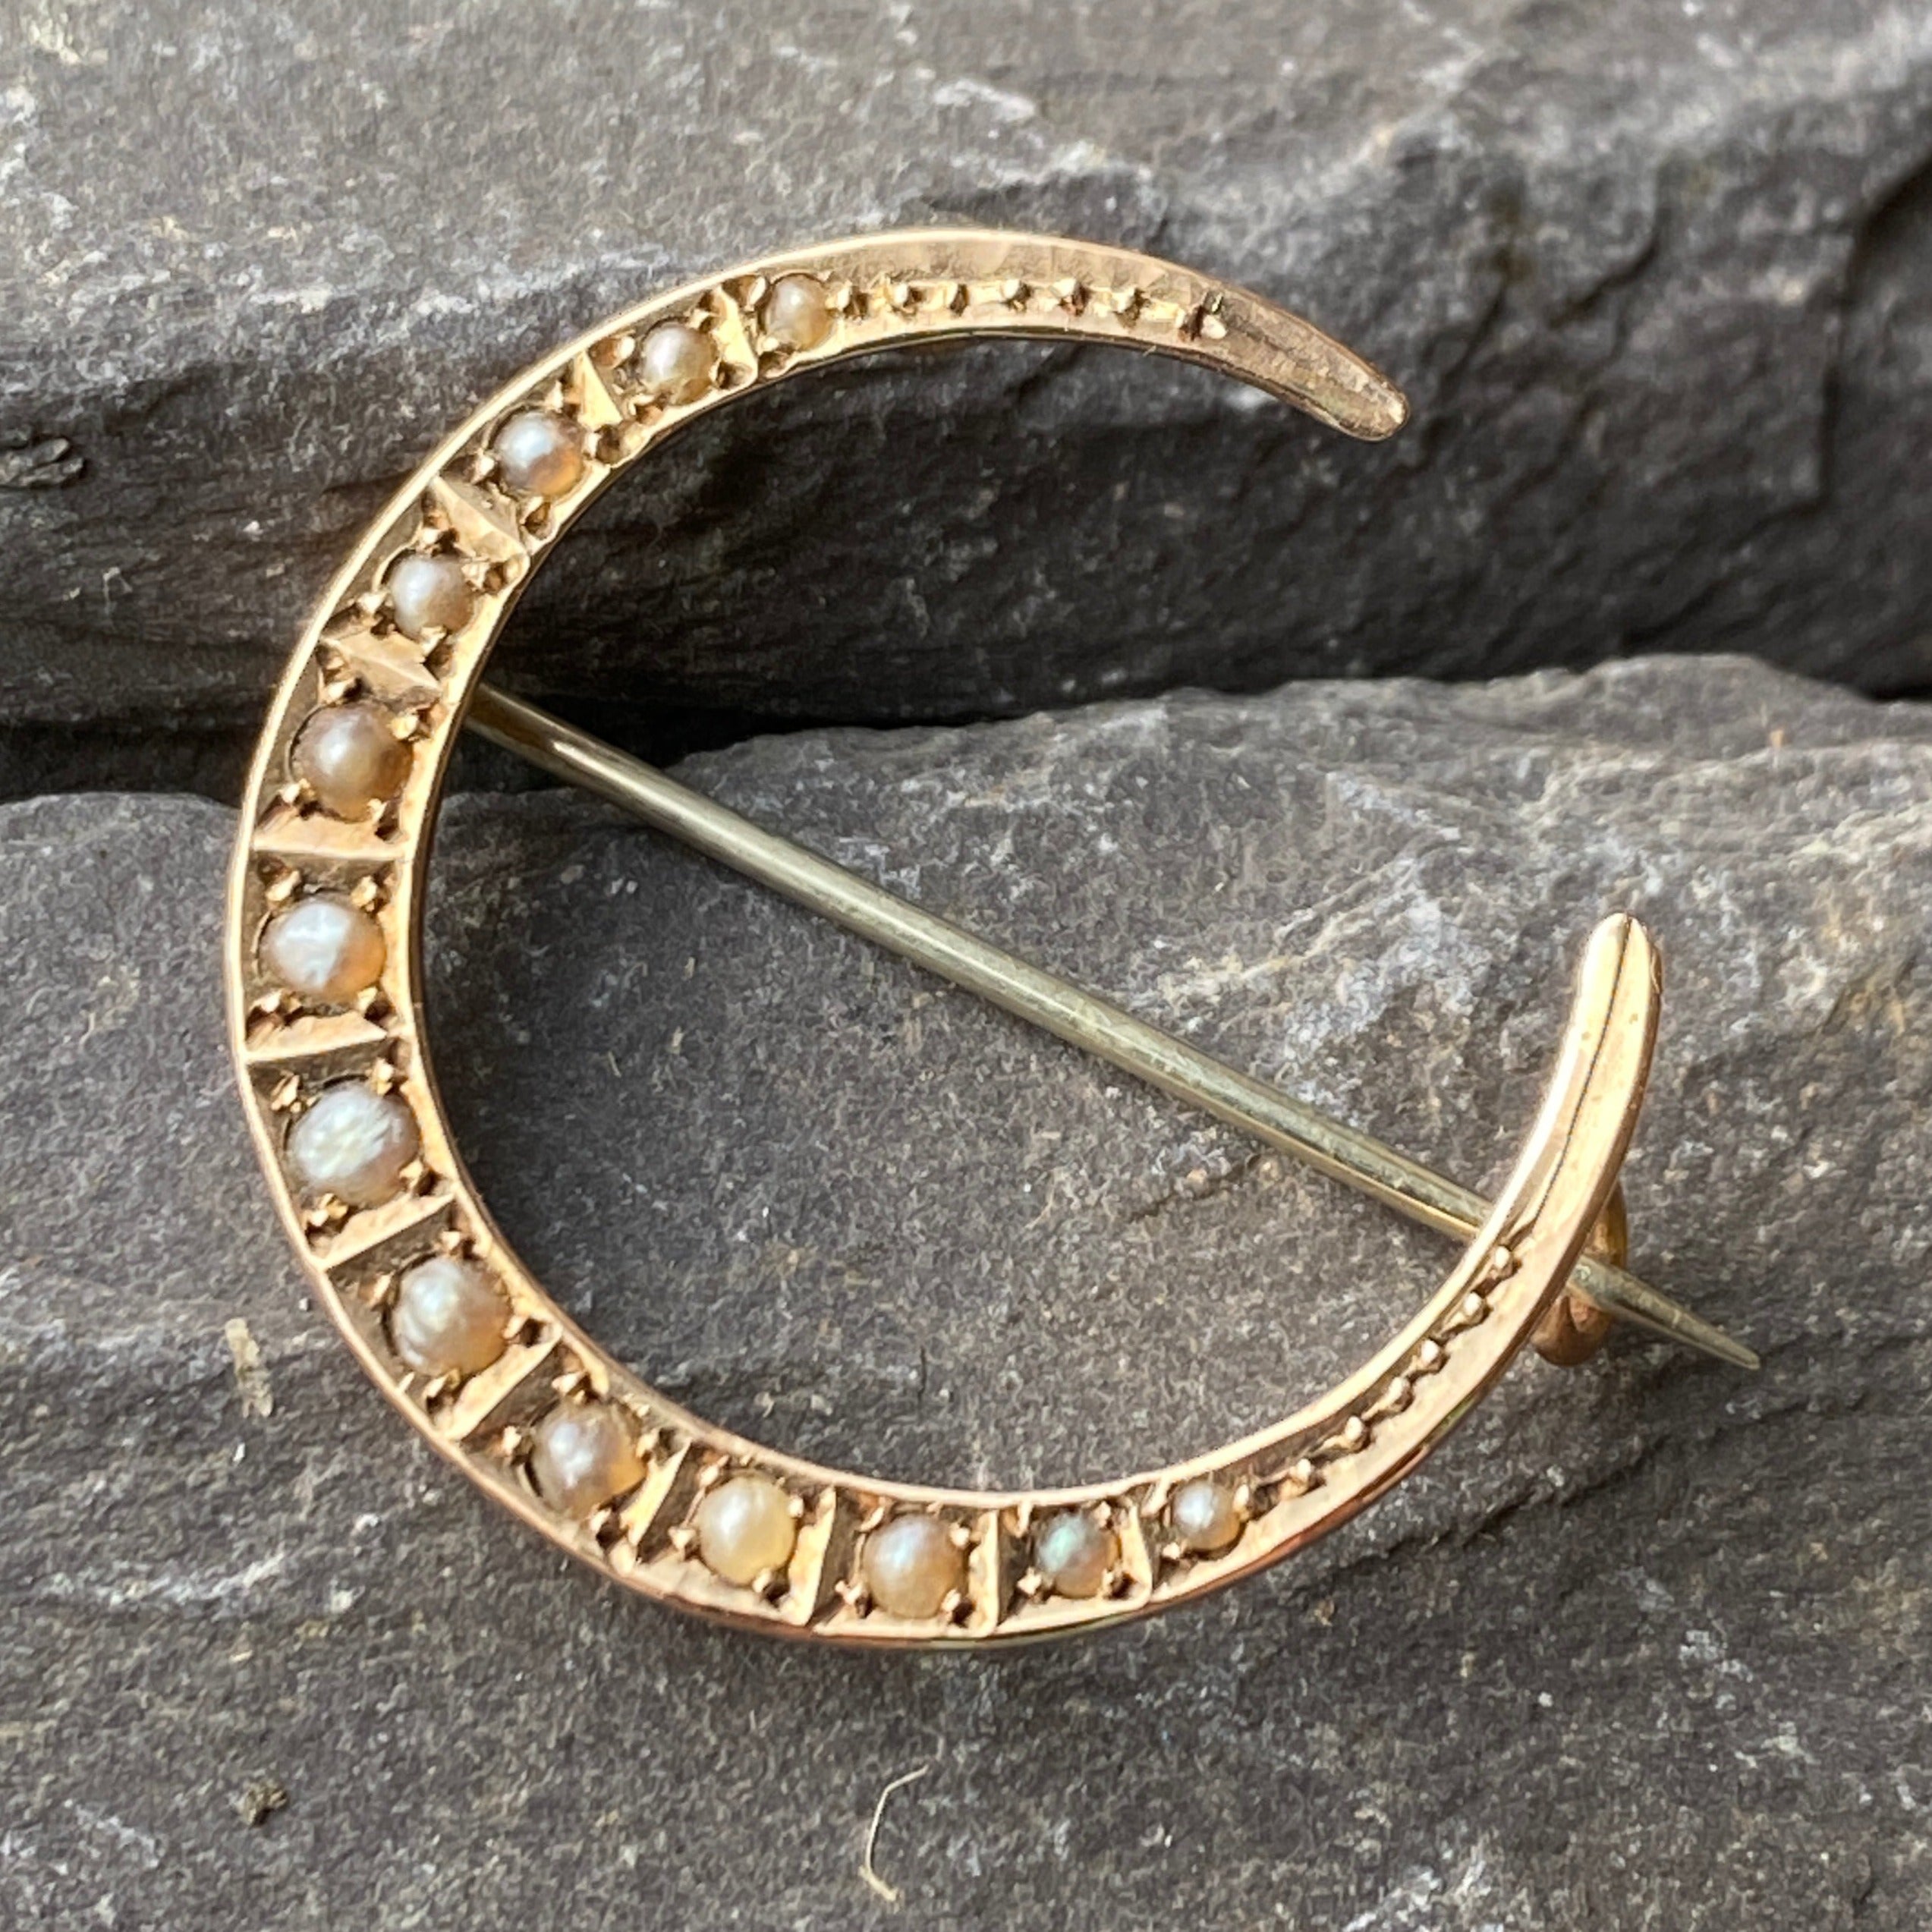 Edwardian 9ct Gold & Seed Pearl Crescent Moon Brooch.